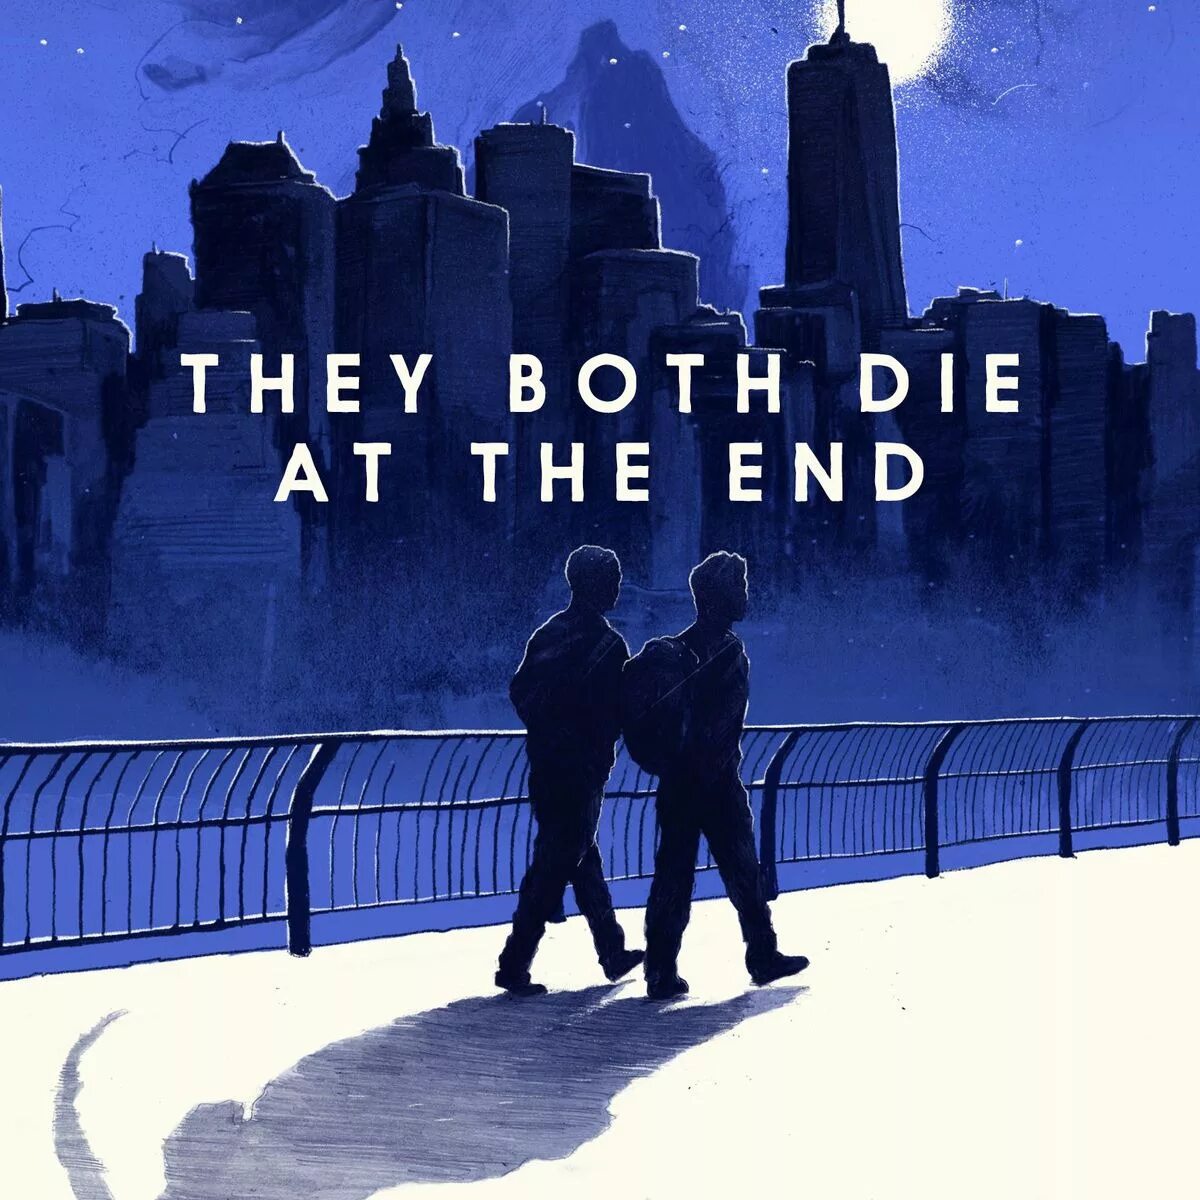 They both die at the end книга. В конце они оба. «They both die at the end» by Adam Silvera. The end of reading the question